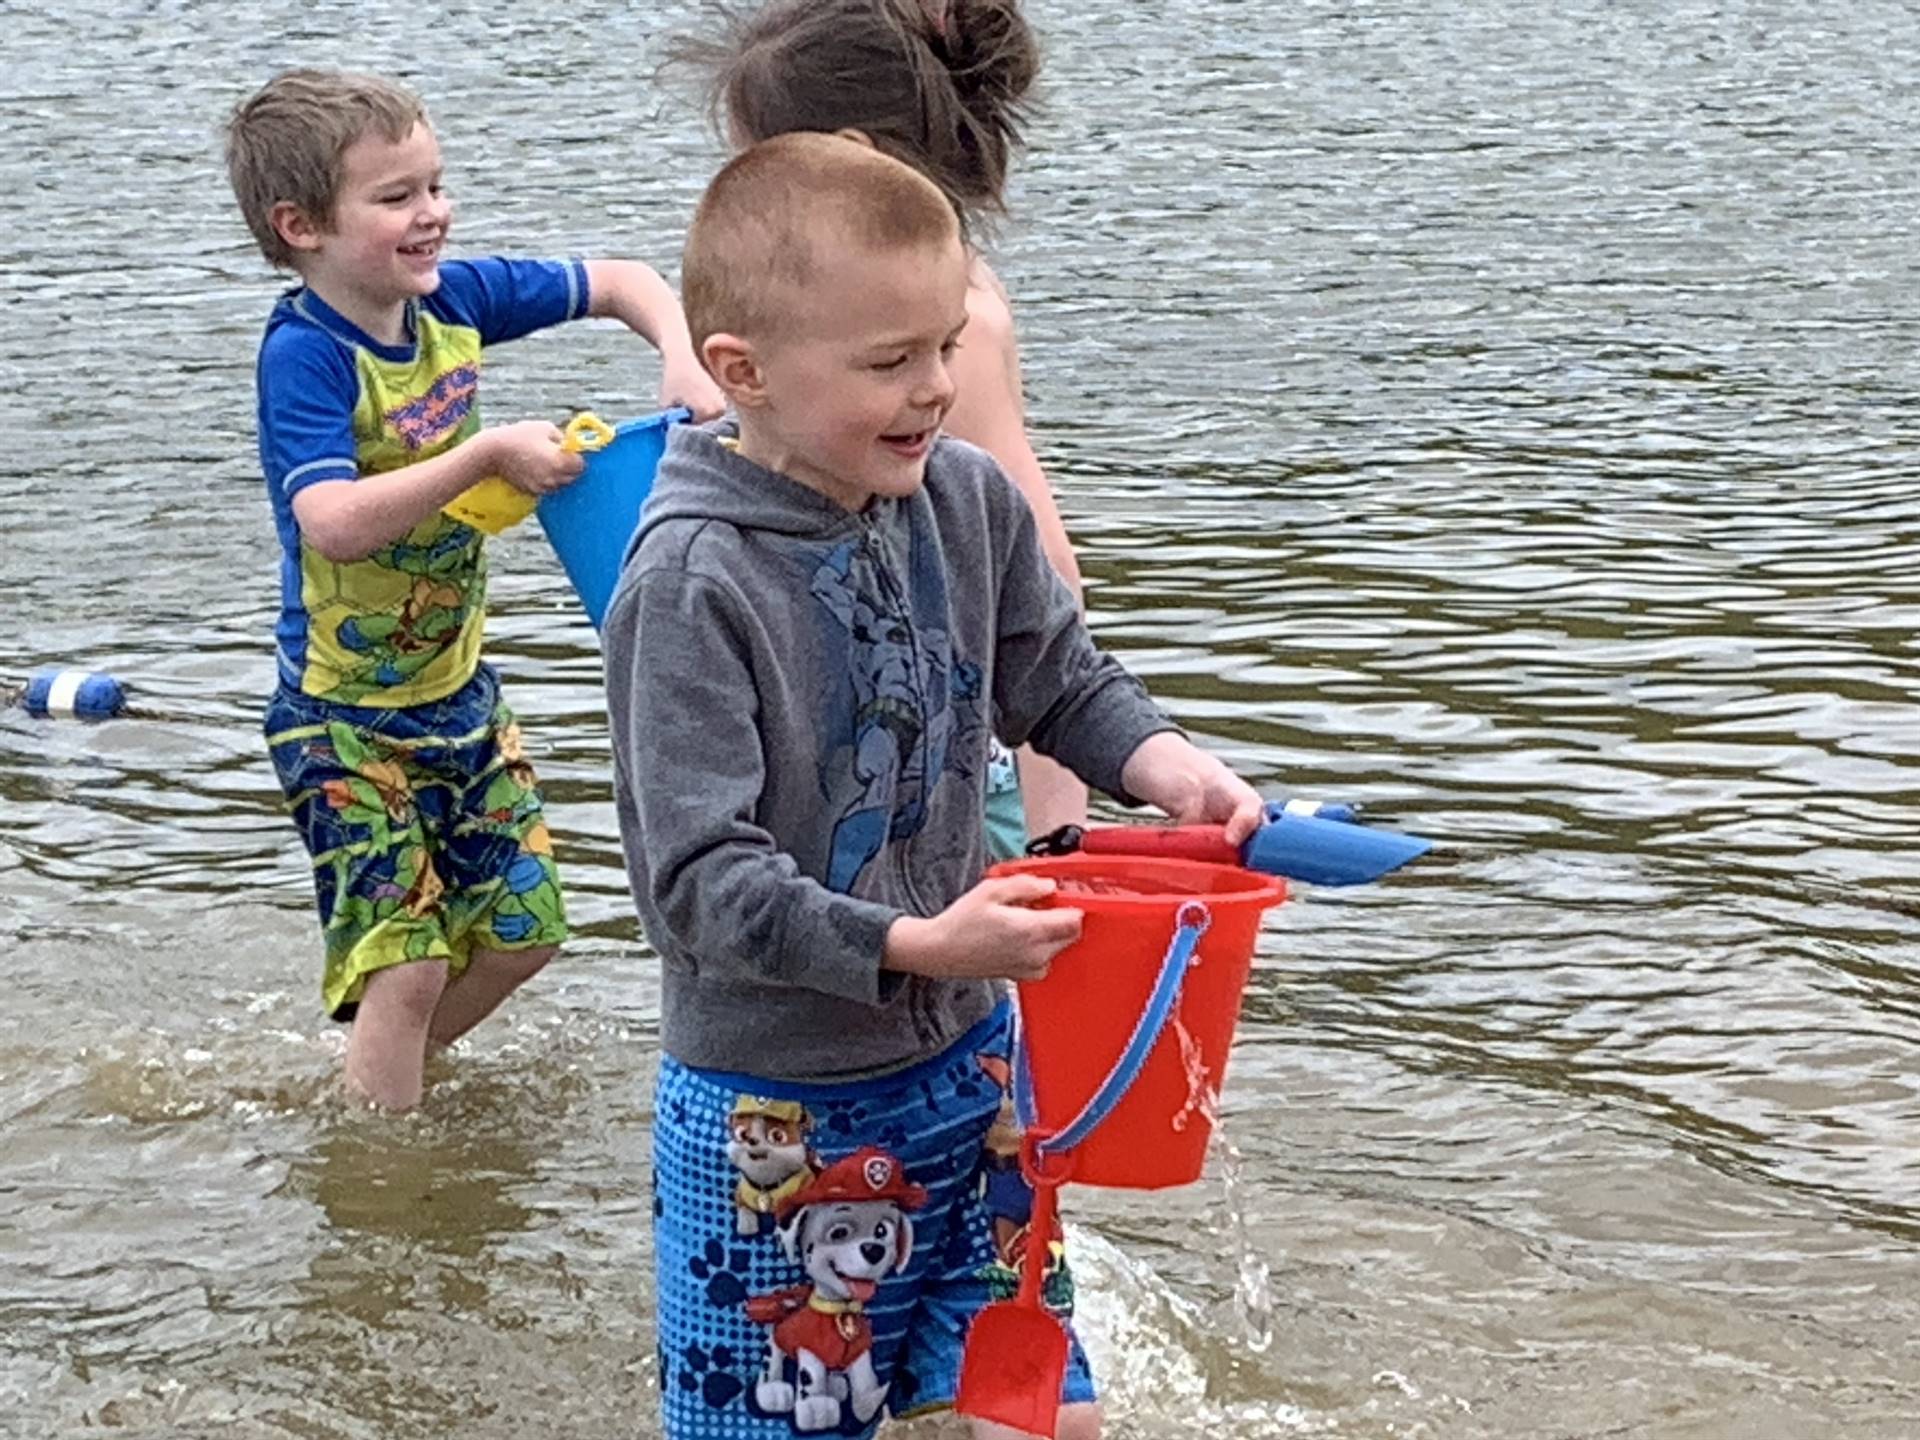 Students play in water.